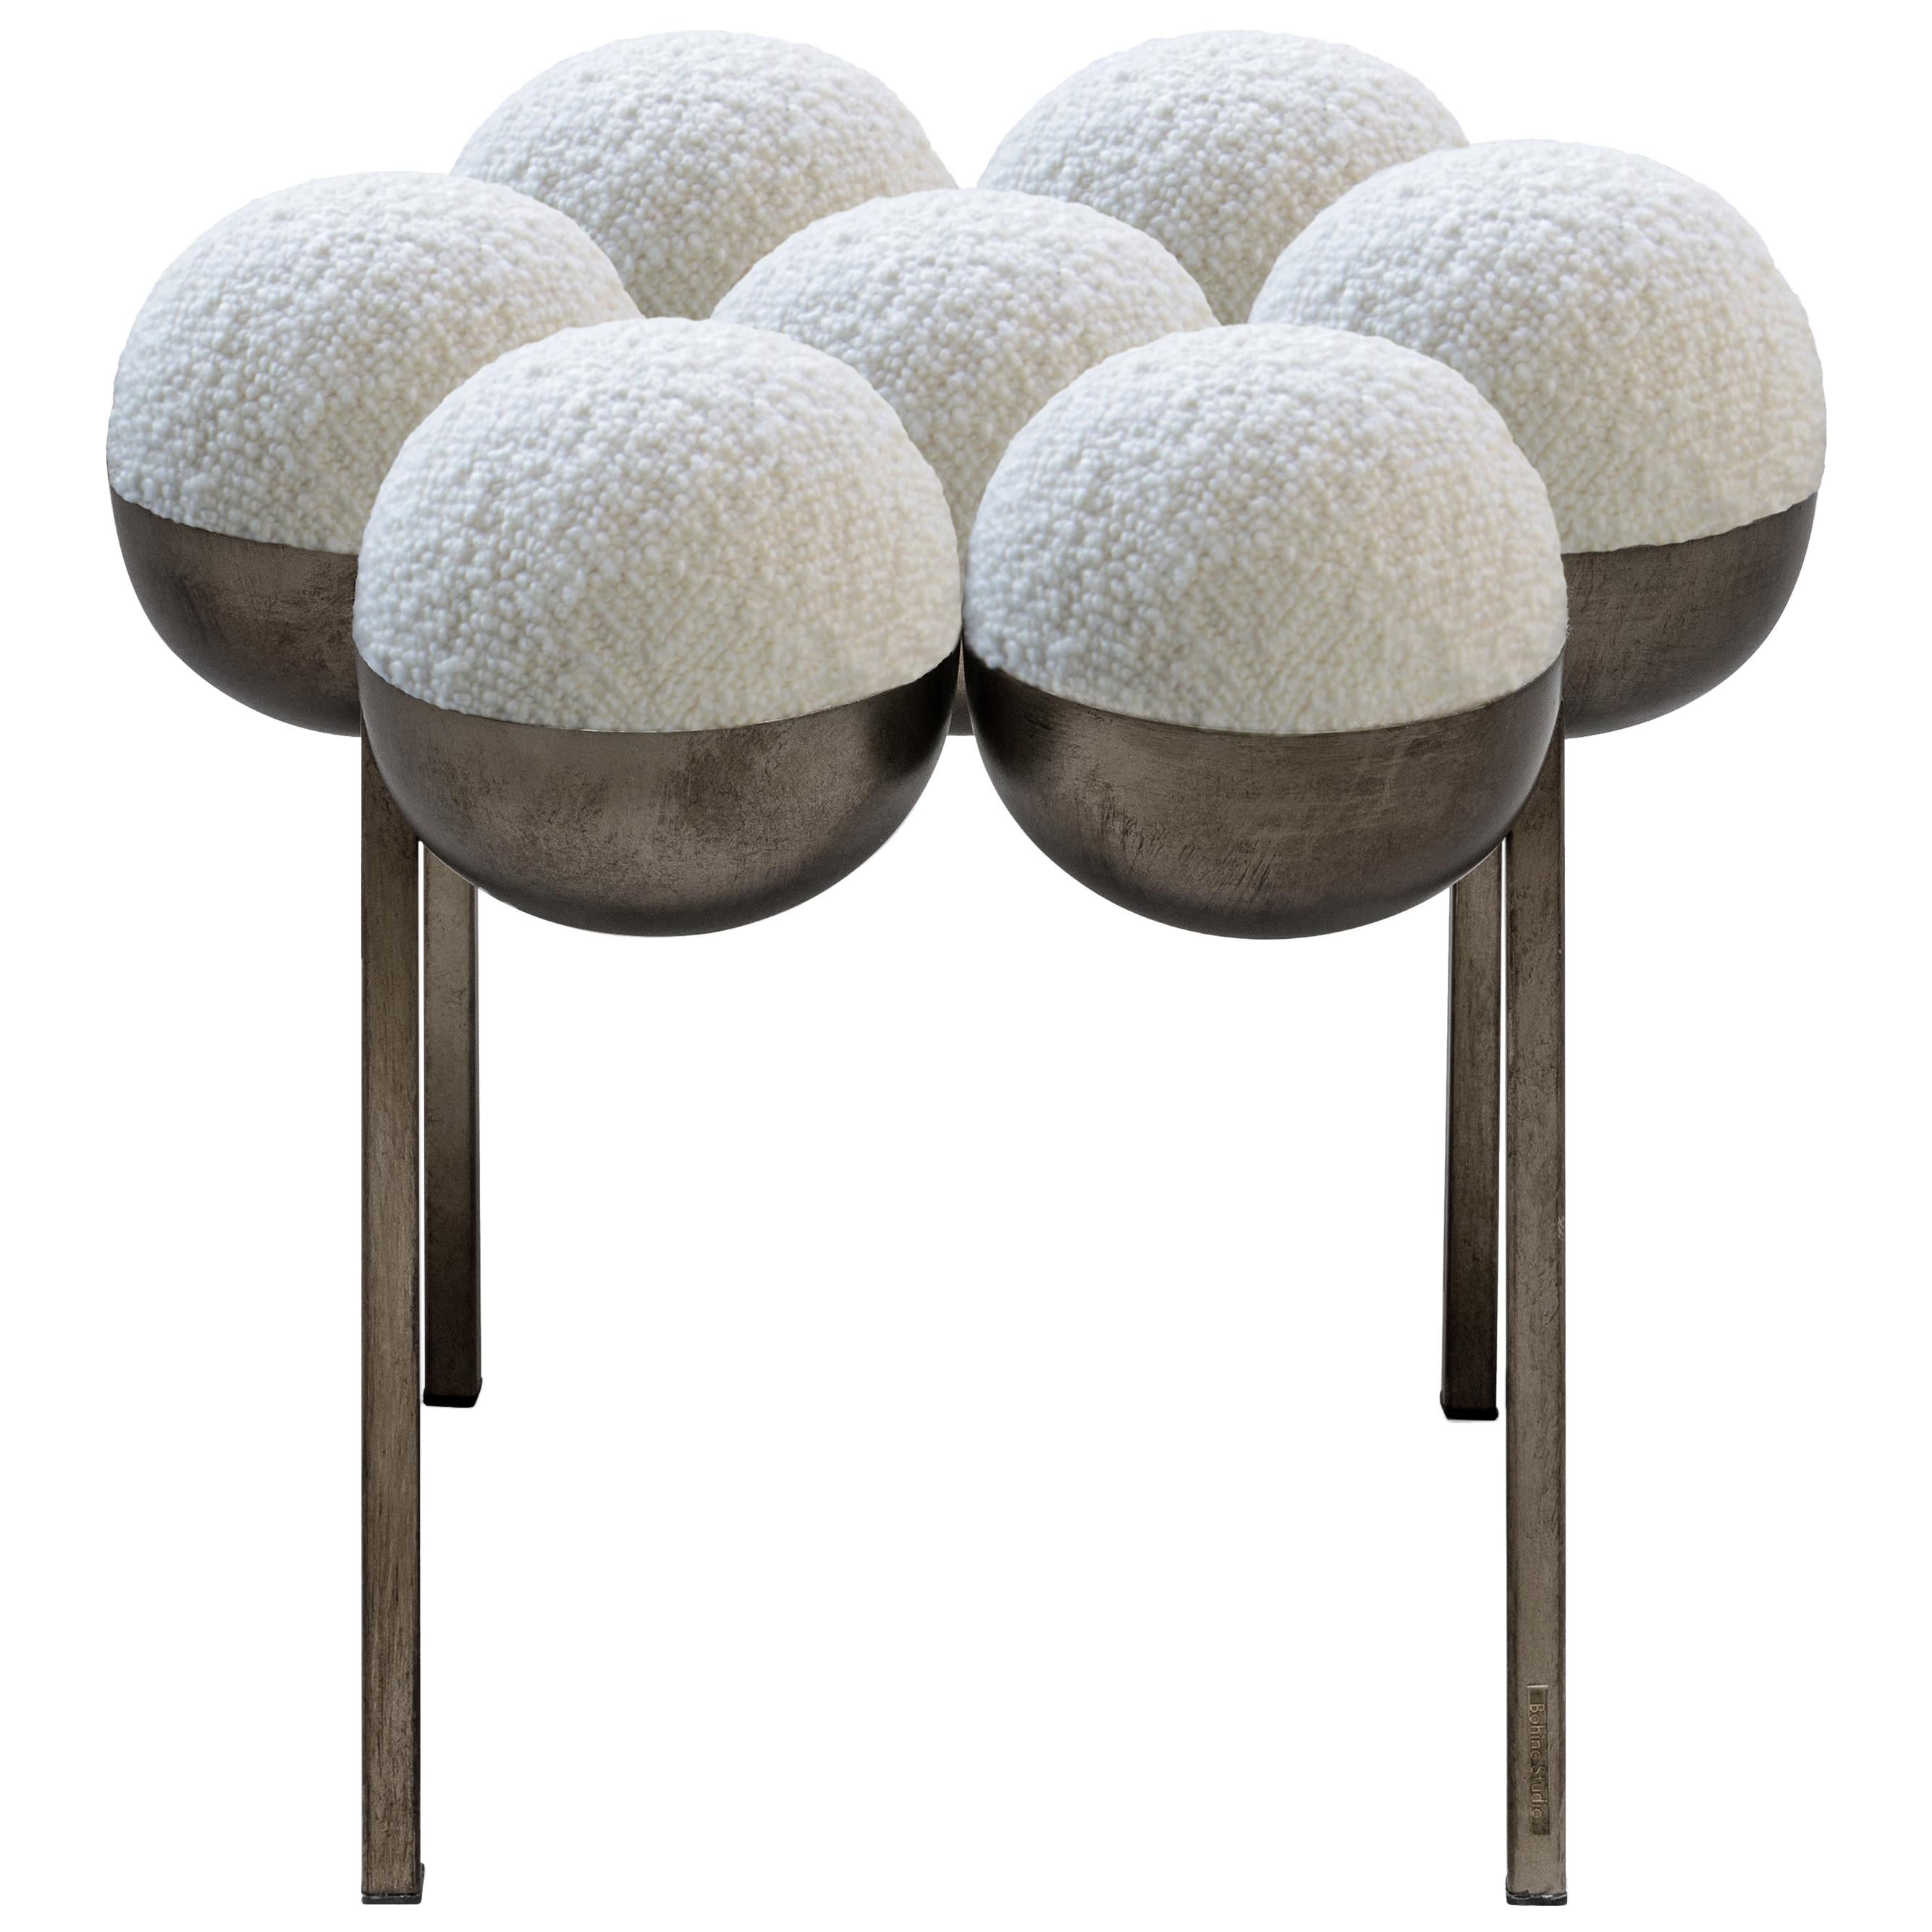 Saturn Pouffe Small, Bronze Oxidized Steel Ivory Boucle, by Lara Bohinc in stock